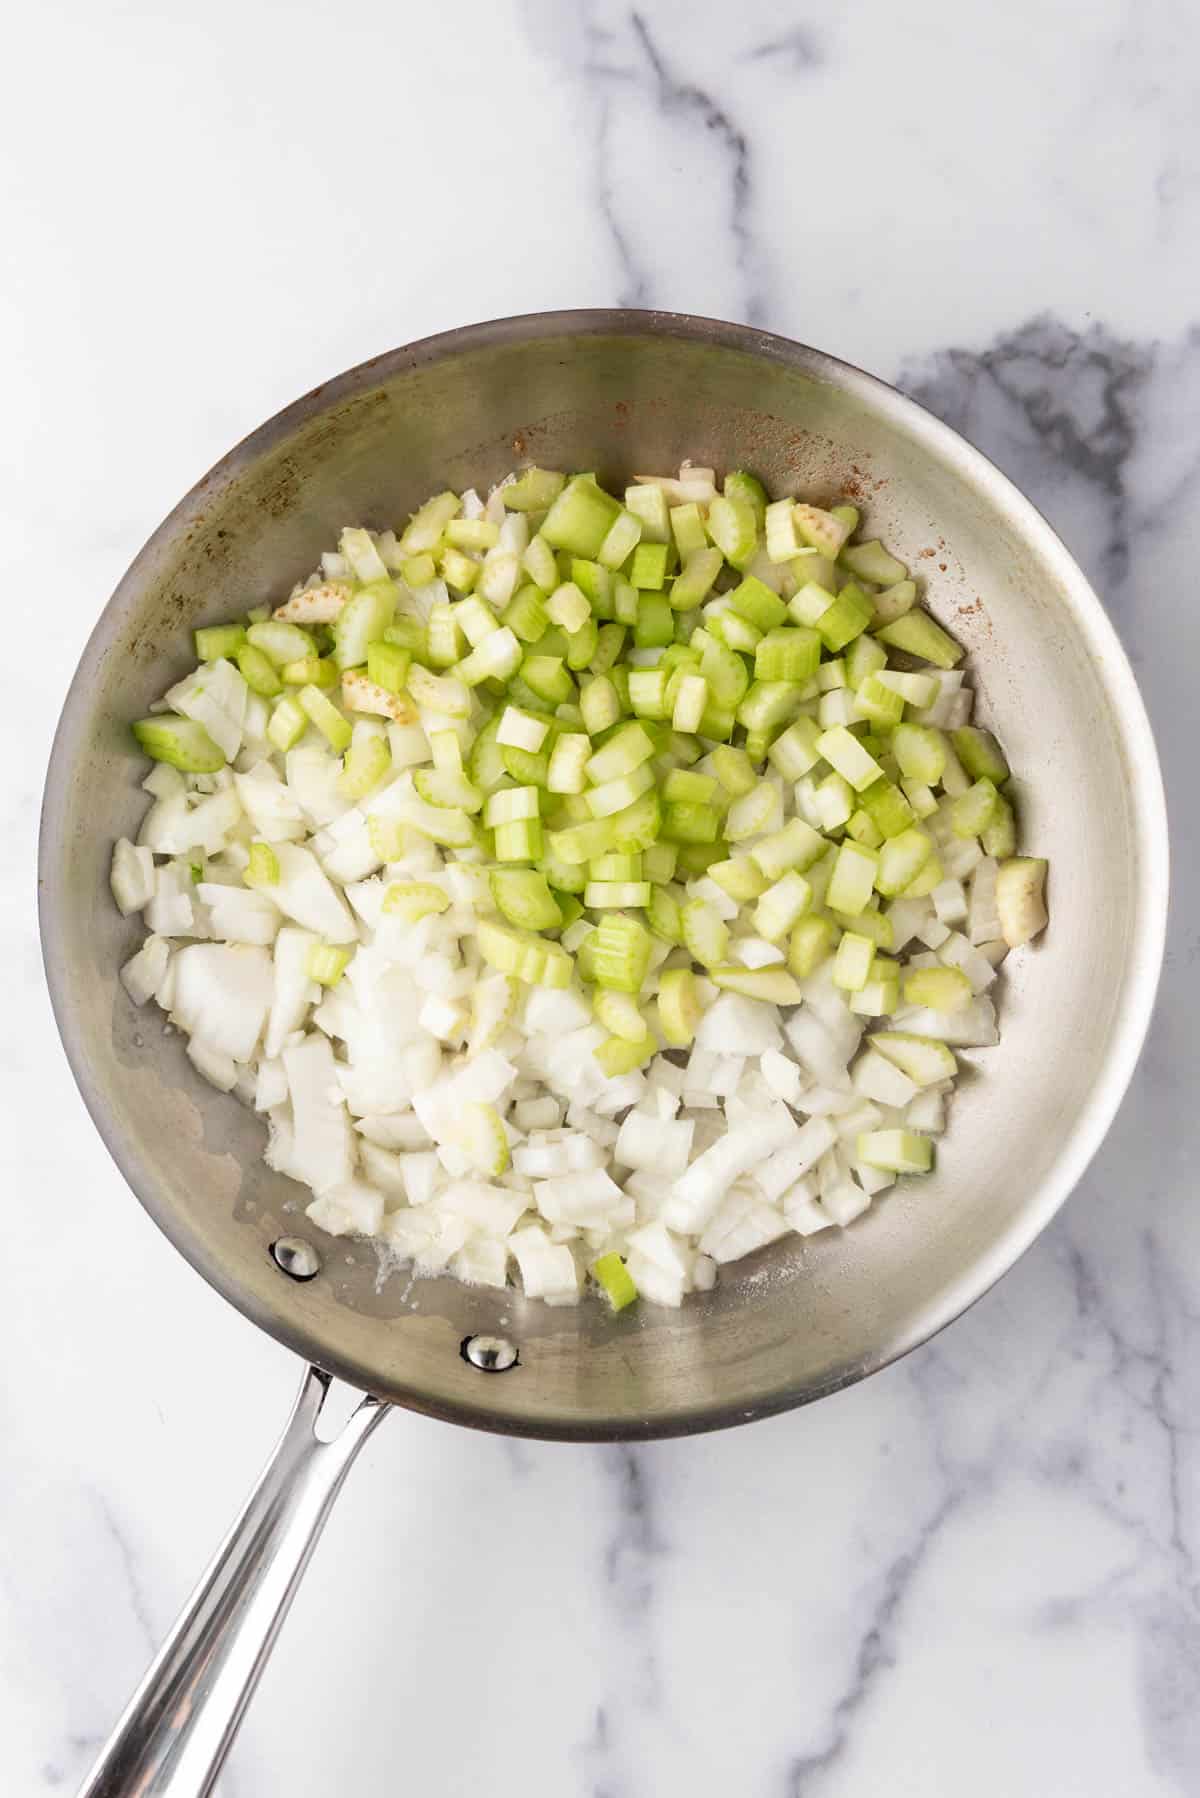 Chopped celery and onions in a large skillet.